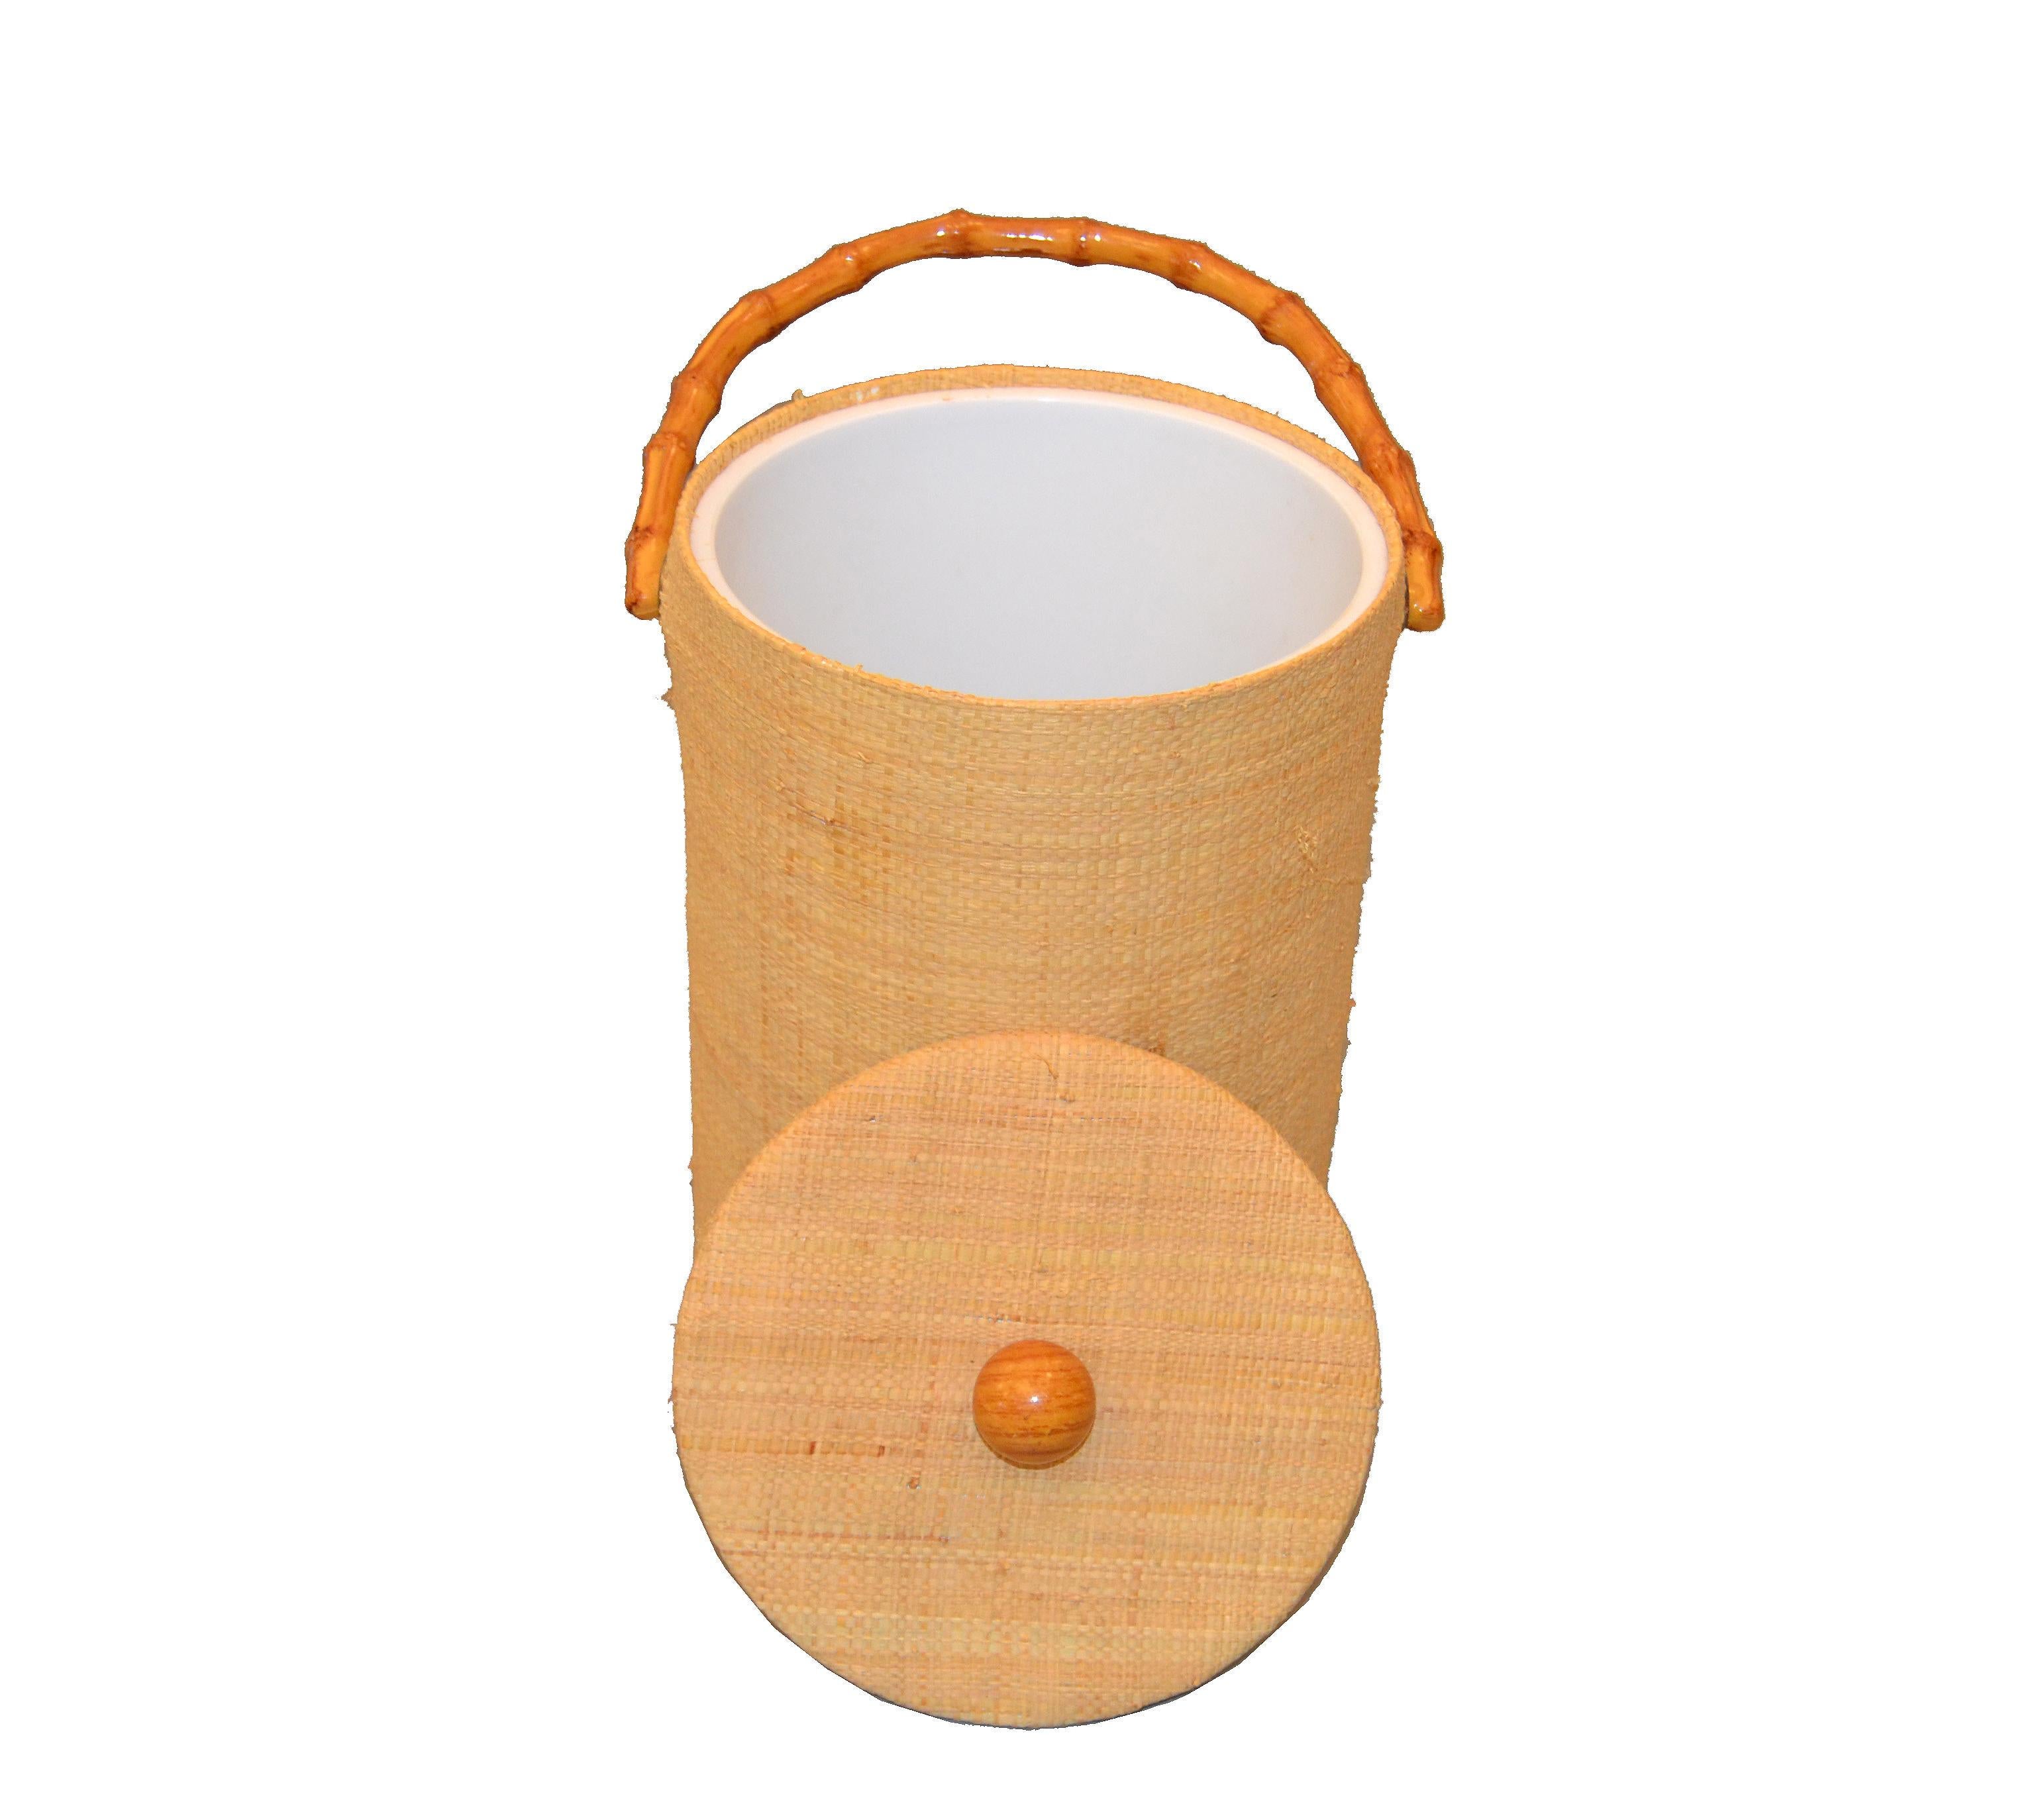 Hollywood Regency Mid-Century Modern Handwoven Cane & Bamboo Insulated Ice Bucket with Lid